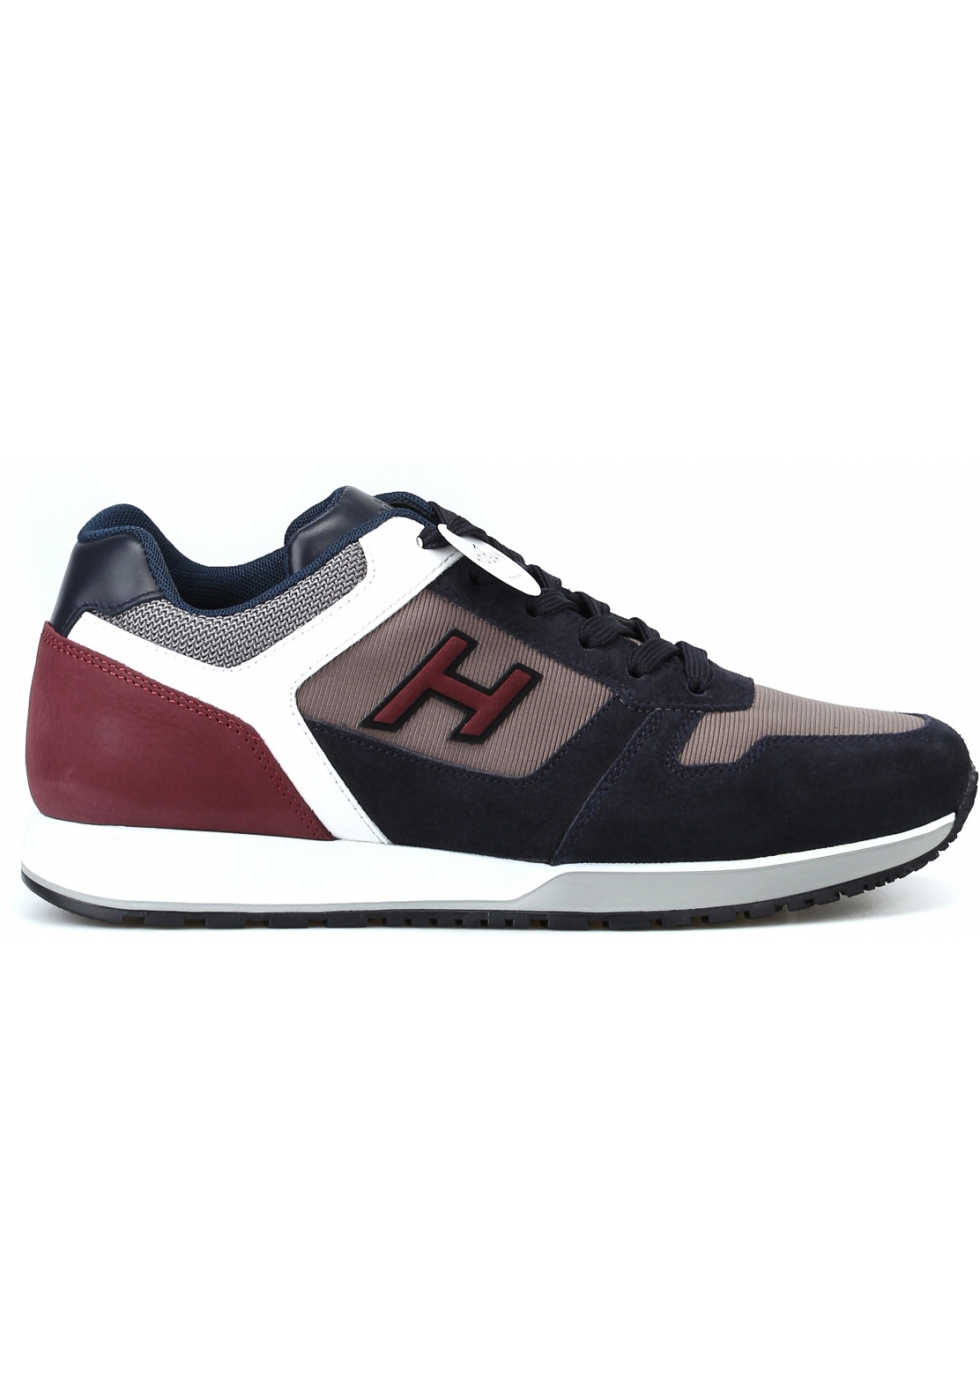 Hogan Men's fashion round toe lace-ups sneakers shoes in multicolor ...